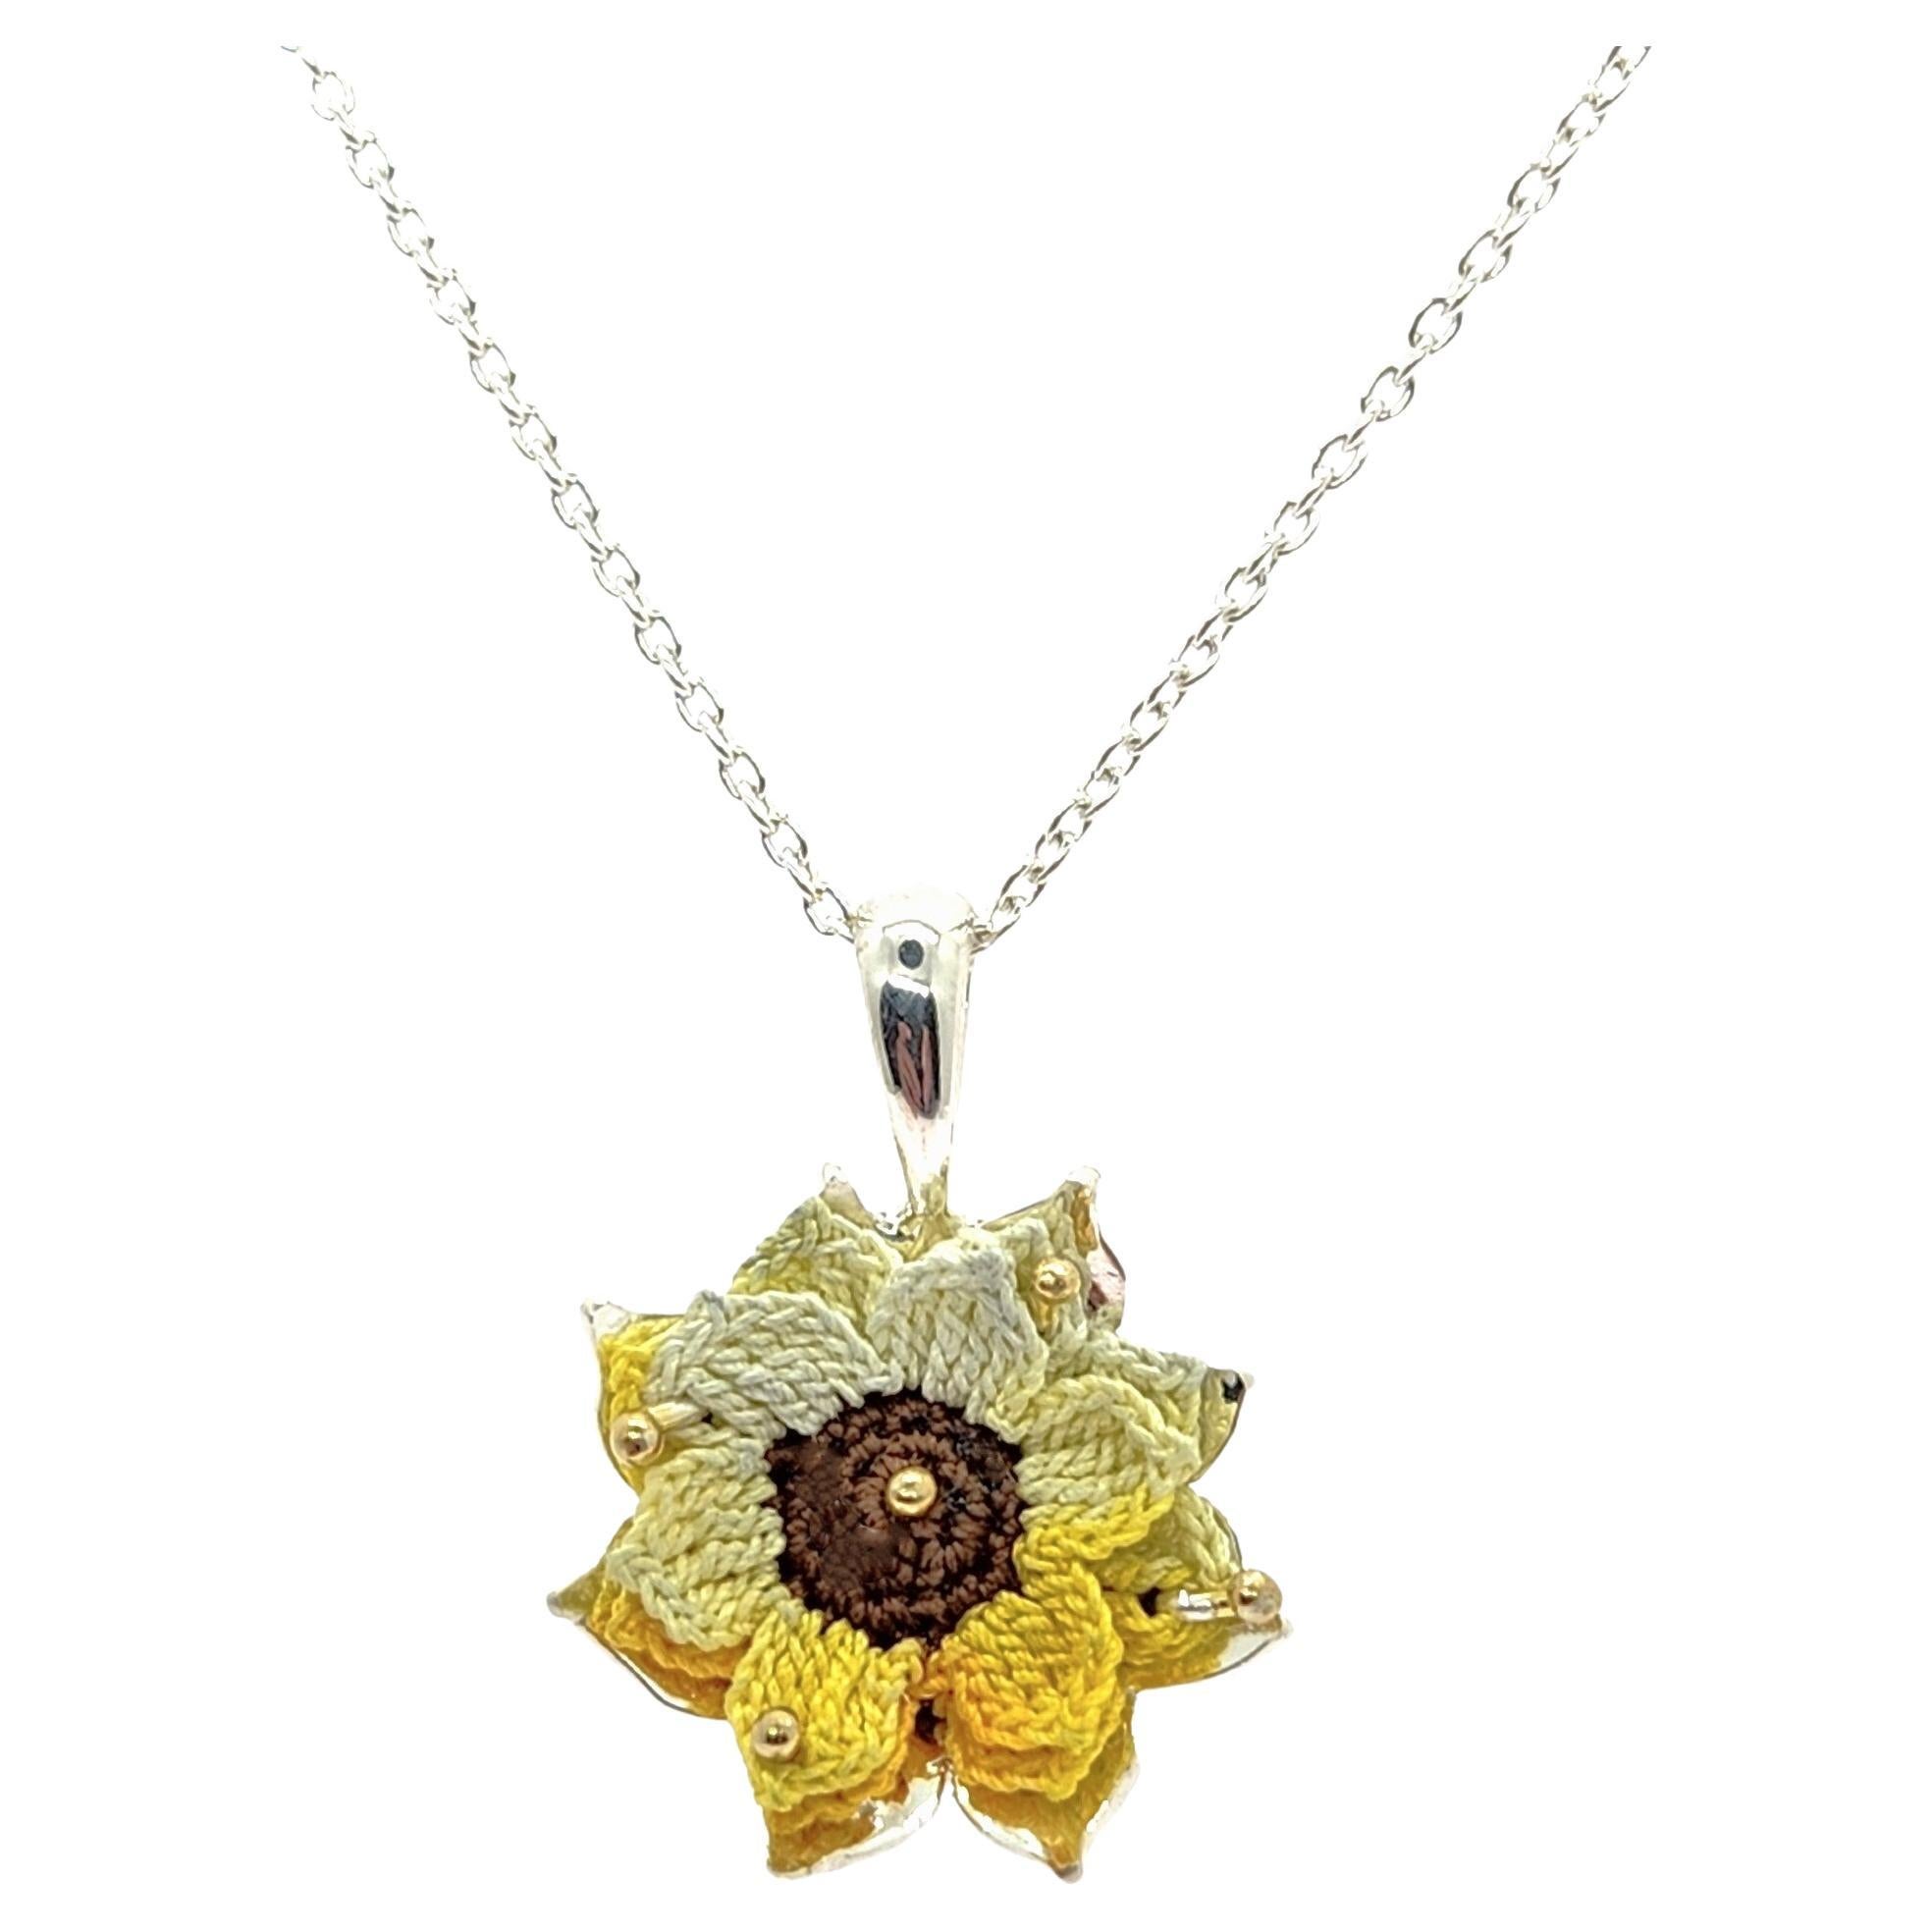 Hand Knit Flower Necklace in Handmade Sterling Silver and 14KY Gold Setting #1